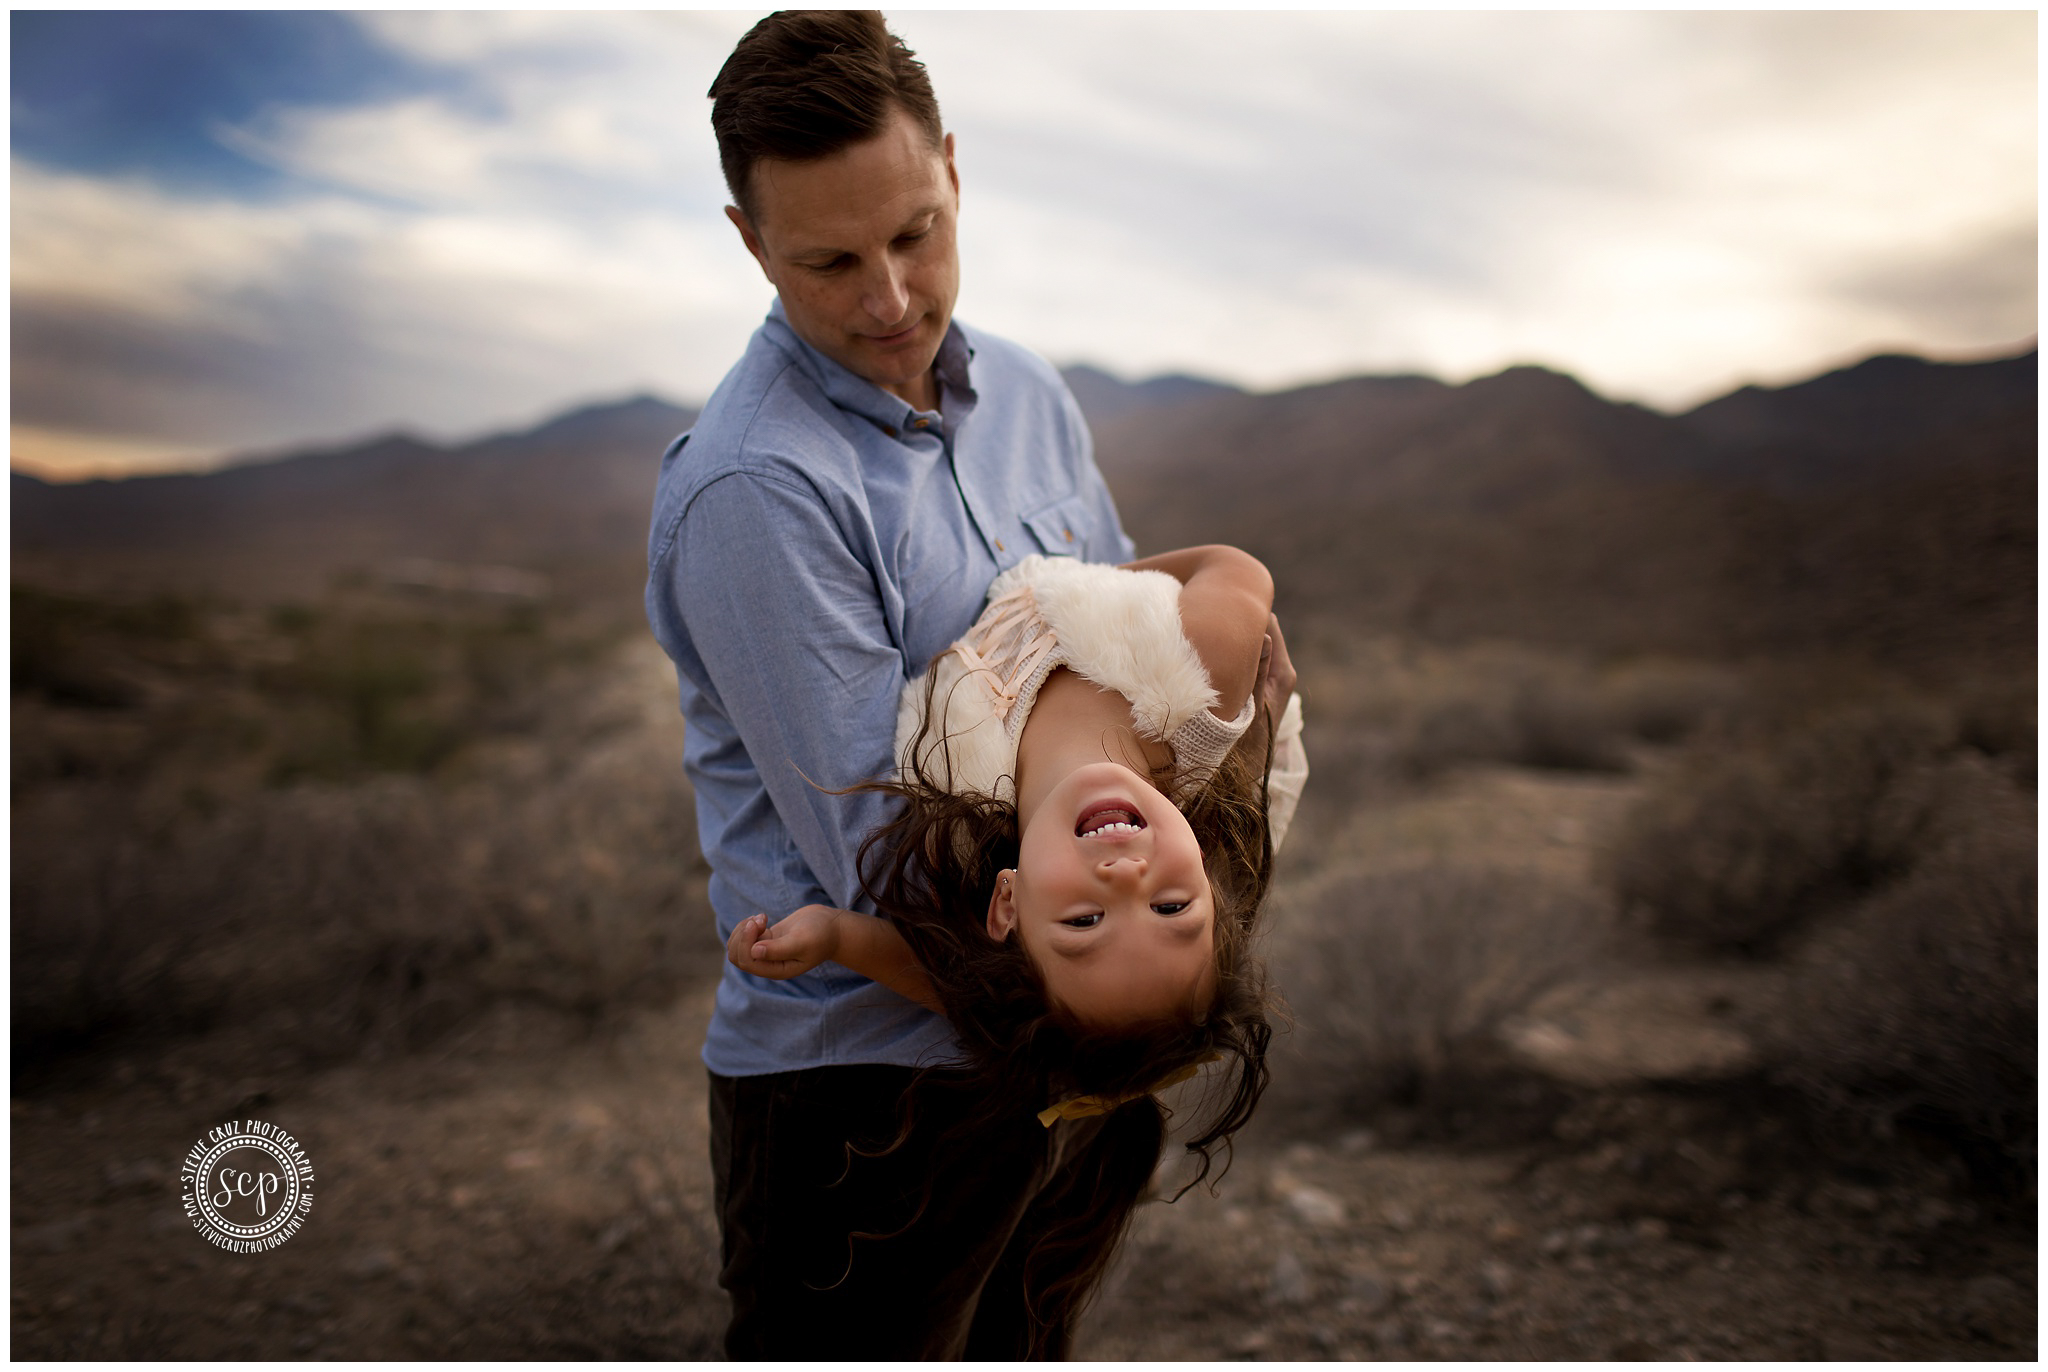 Fun daddy daughter picture. California family photographer.